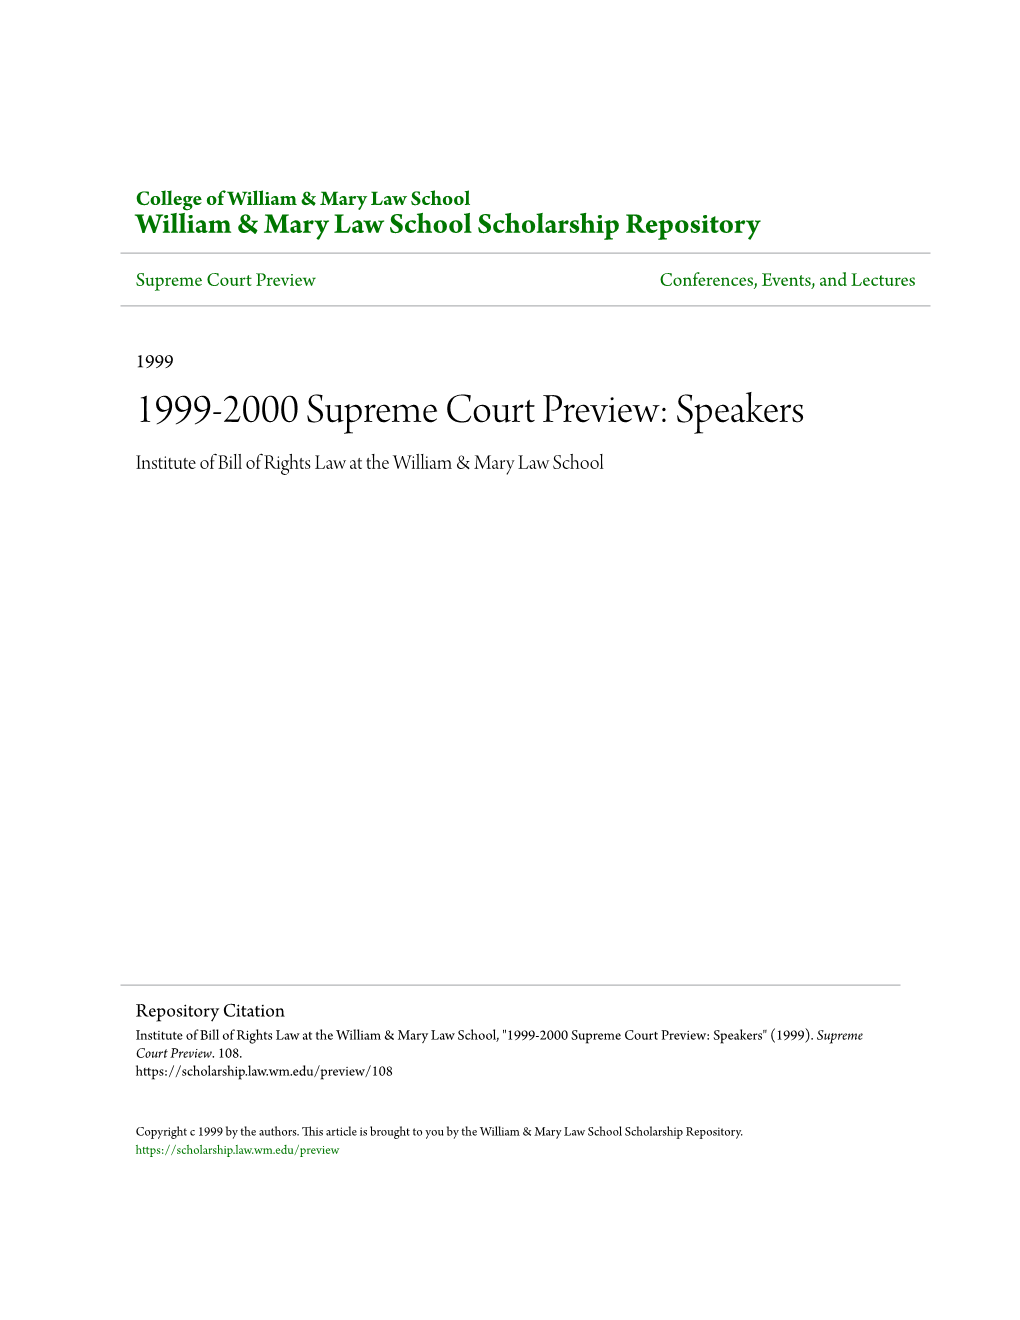 1999-2000 Supreme Court Preview: Speakers Institute of Bill of Rights Law at the William & Mary Law School